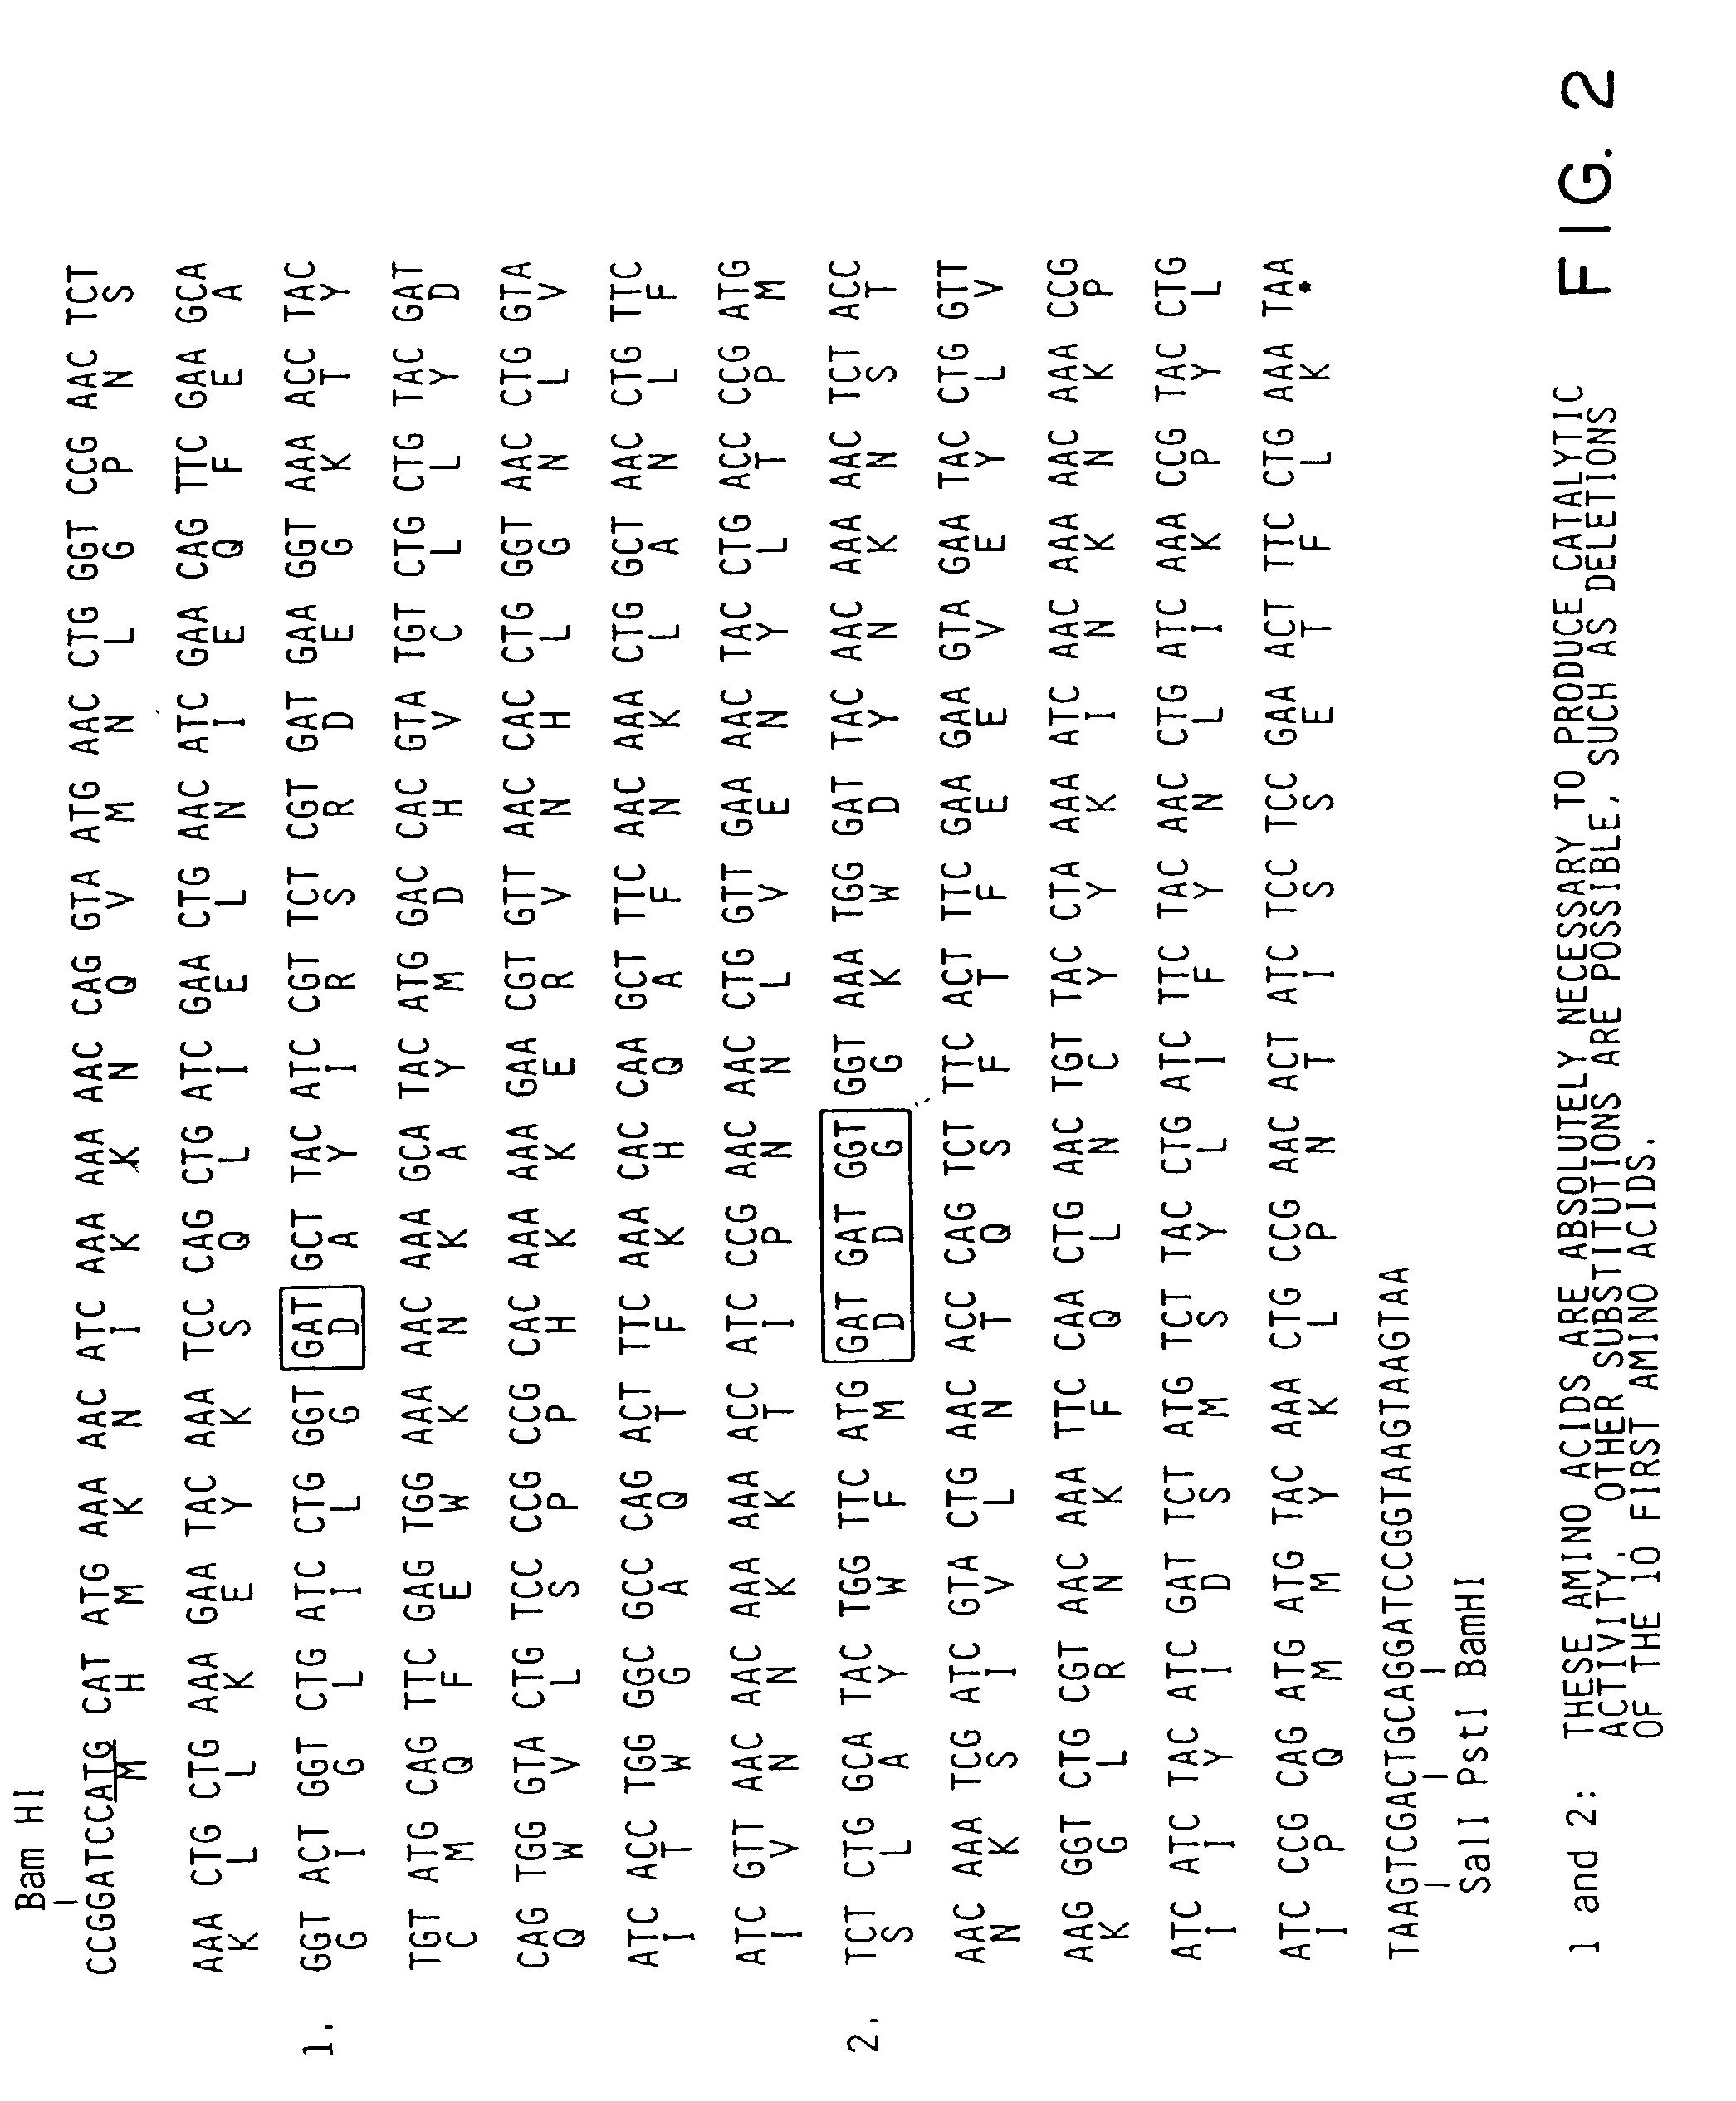 Nucleotide sequence encoding the enzyme I-Scel and the uses thereof